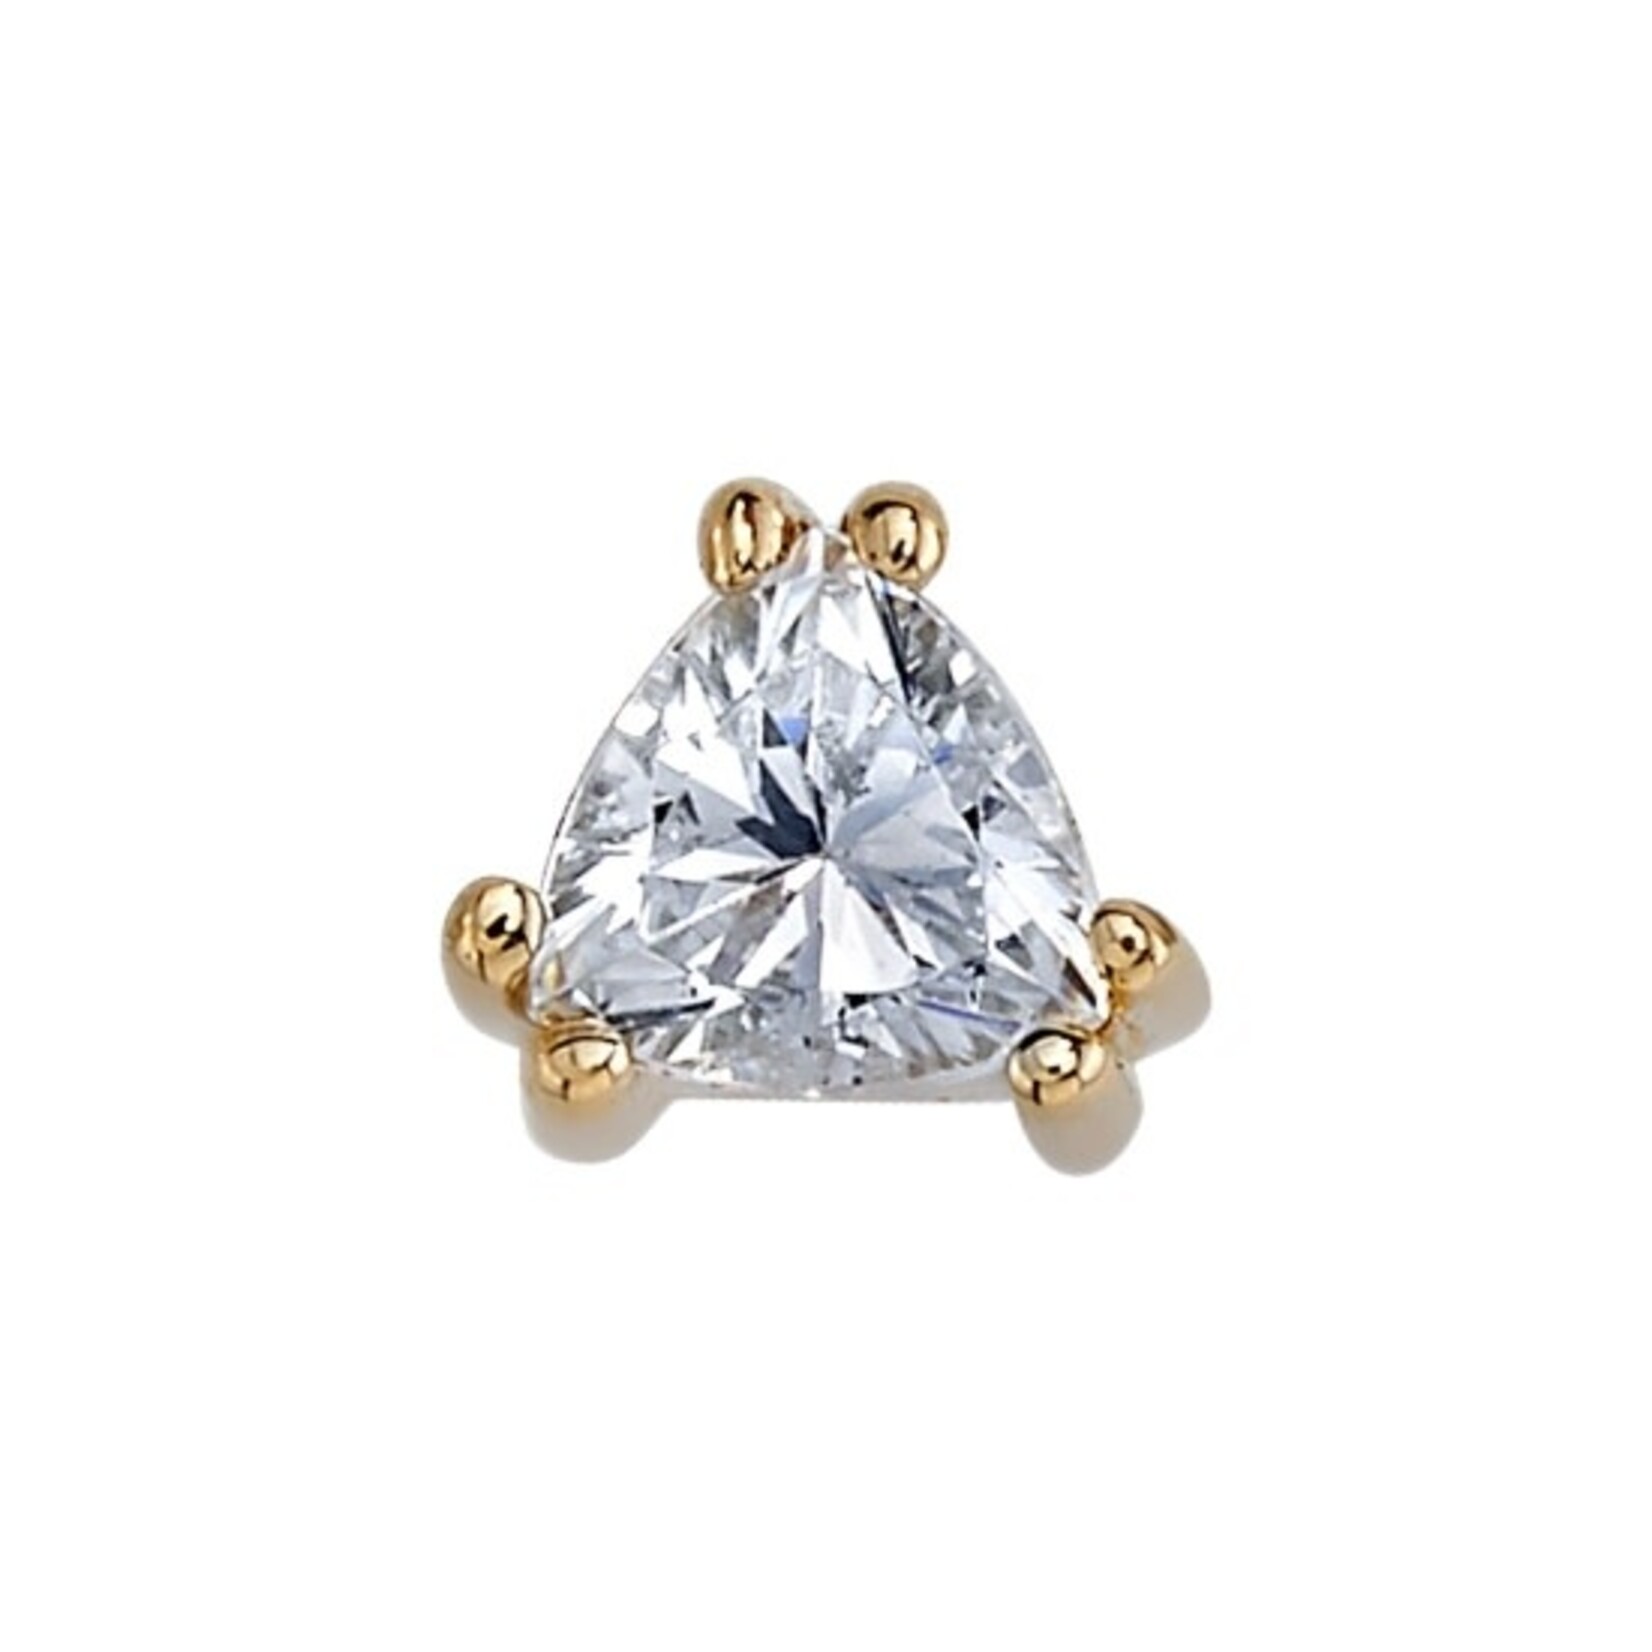 BVLA BVLA "Tanti" double-prong threaded end with 3.0 trillion cut CZ